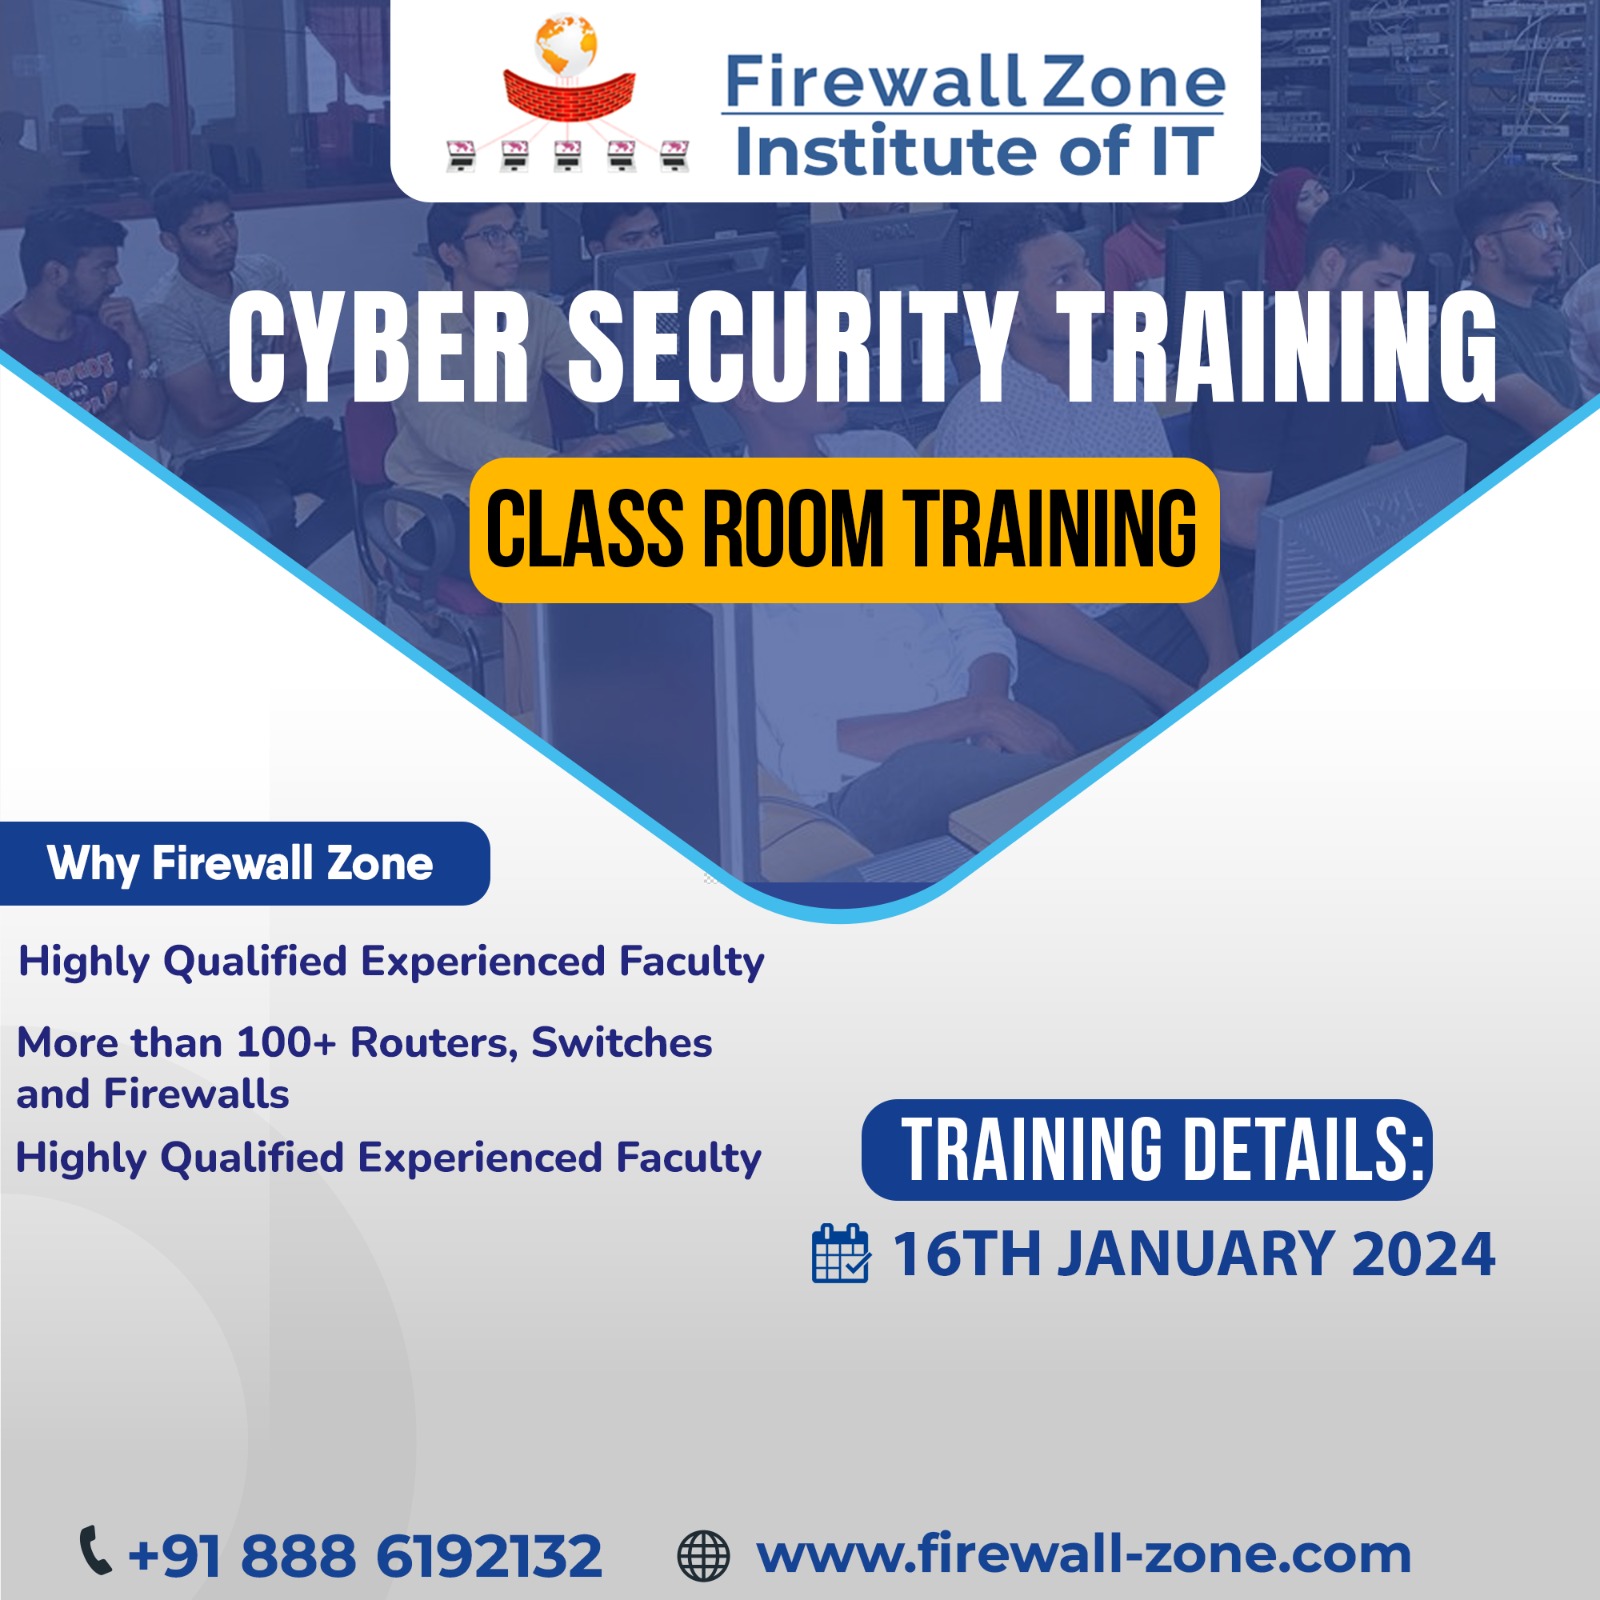 Cyber Security Training In Hyderabad Starts on 16th January 2024 at Firewall-zone Institute of IT, Hyderabad, Telangana, India